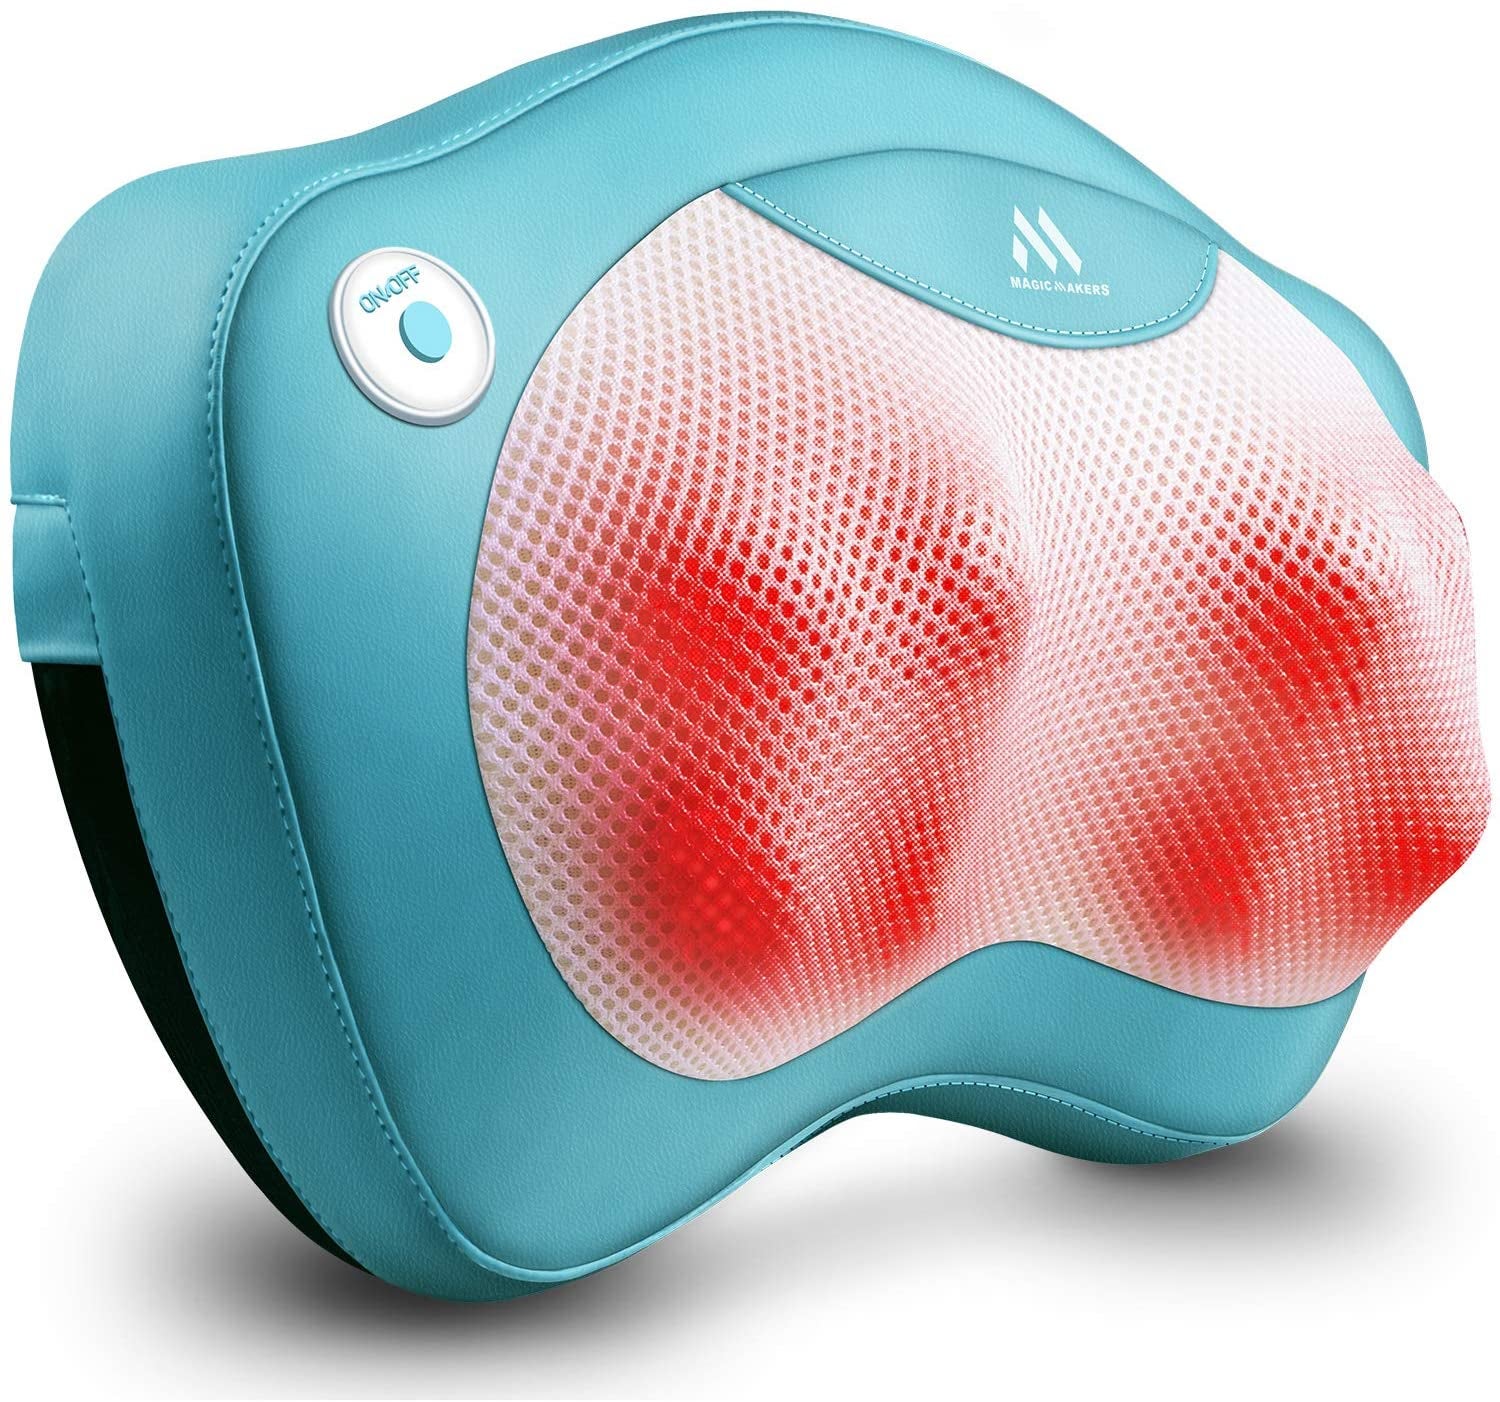 Back massager equipped with 15-minute auto shut-off system and overheat protection device, gift neck massager brings you no worries about the safety